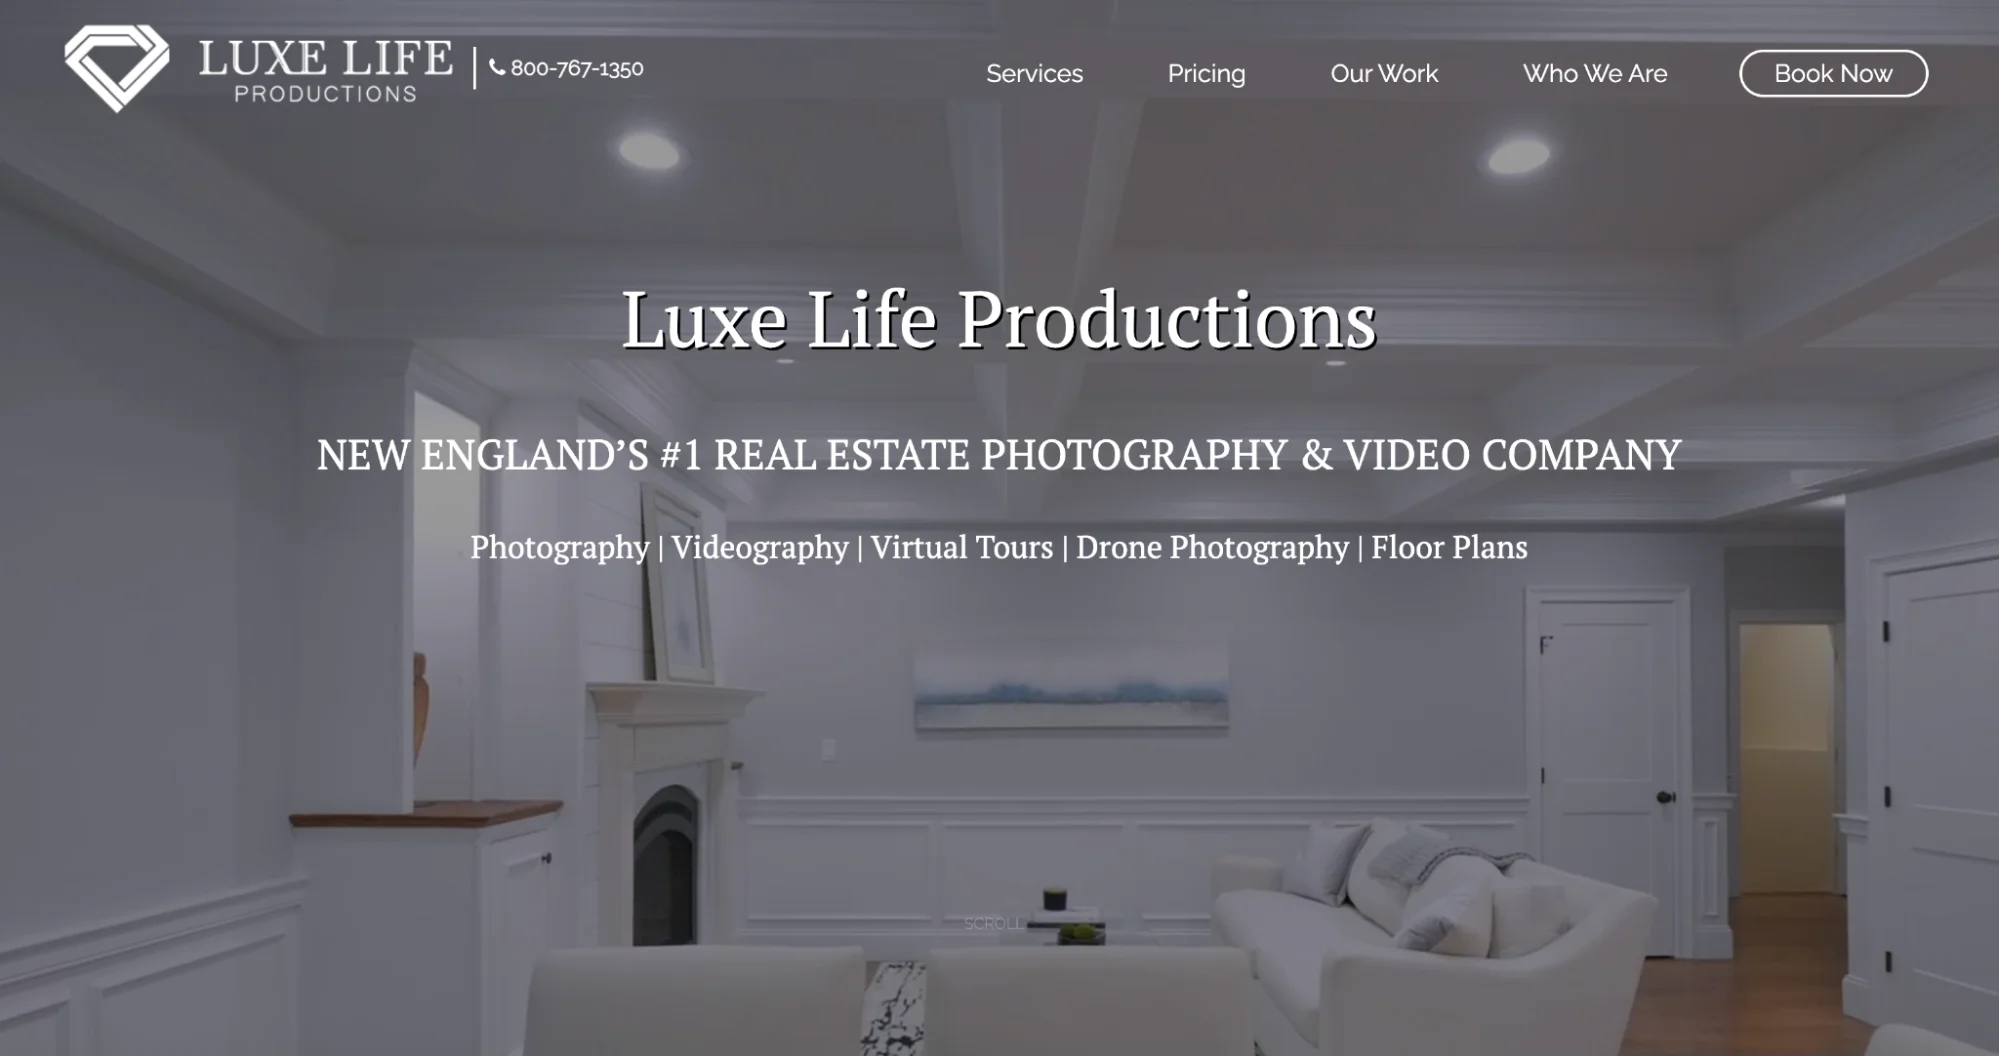 Luxe Life Productions